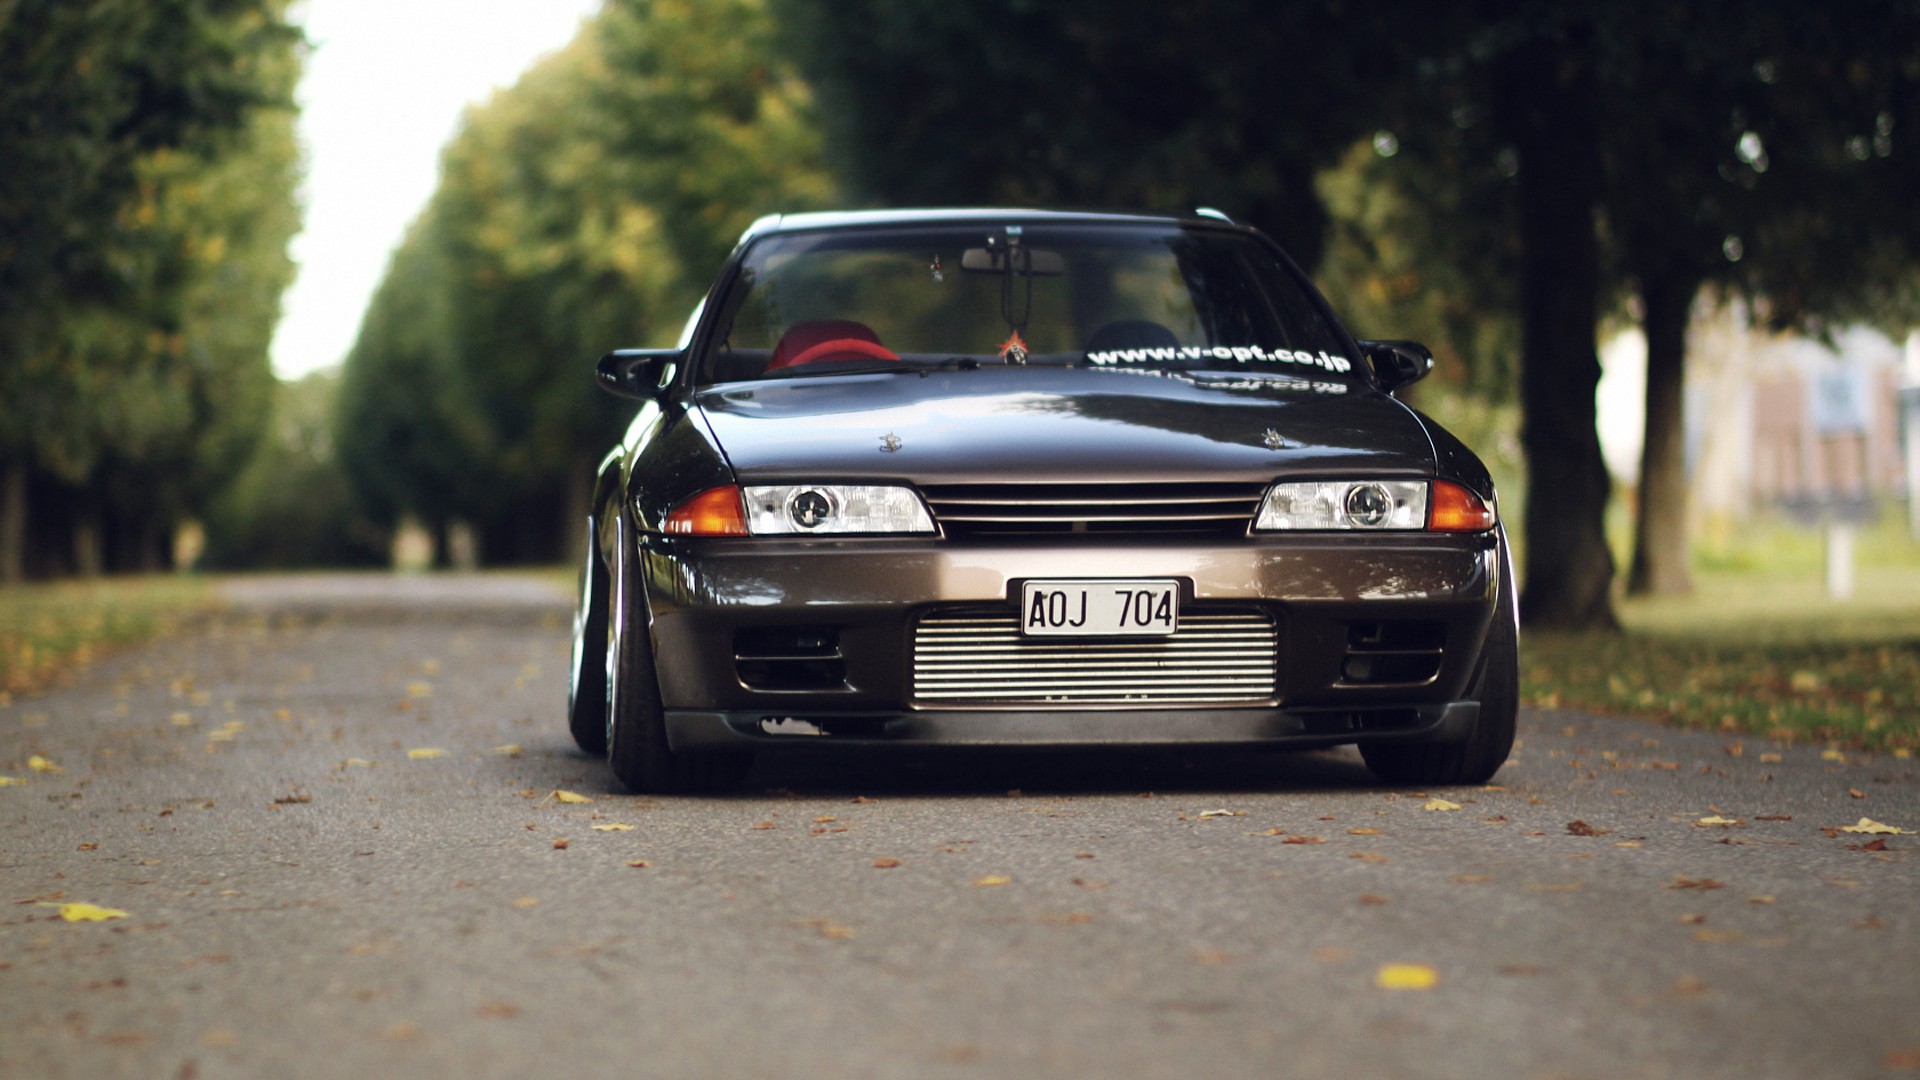 R32 wallpaper I have trouble finding these so I thought Id share   rSkyLine